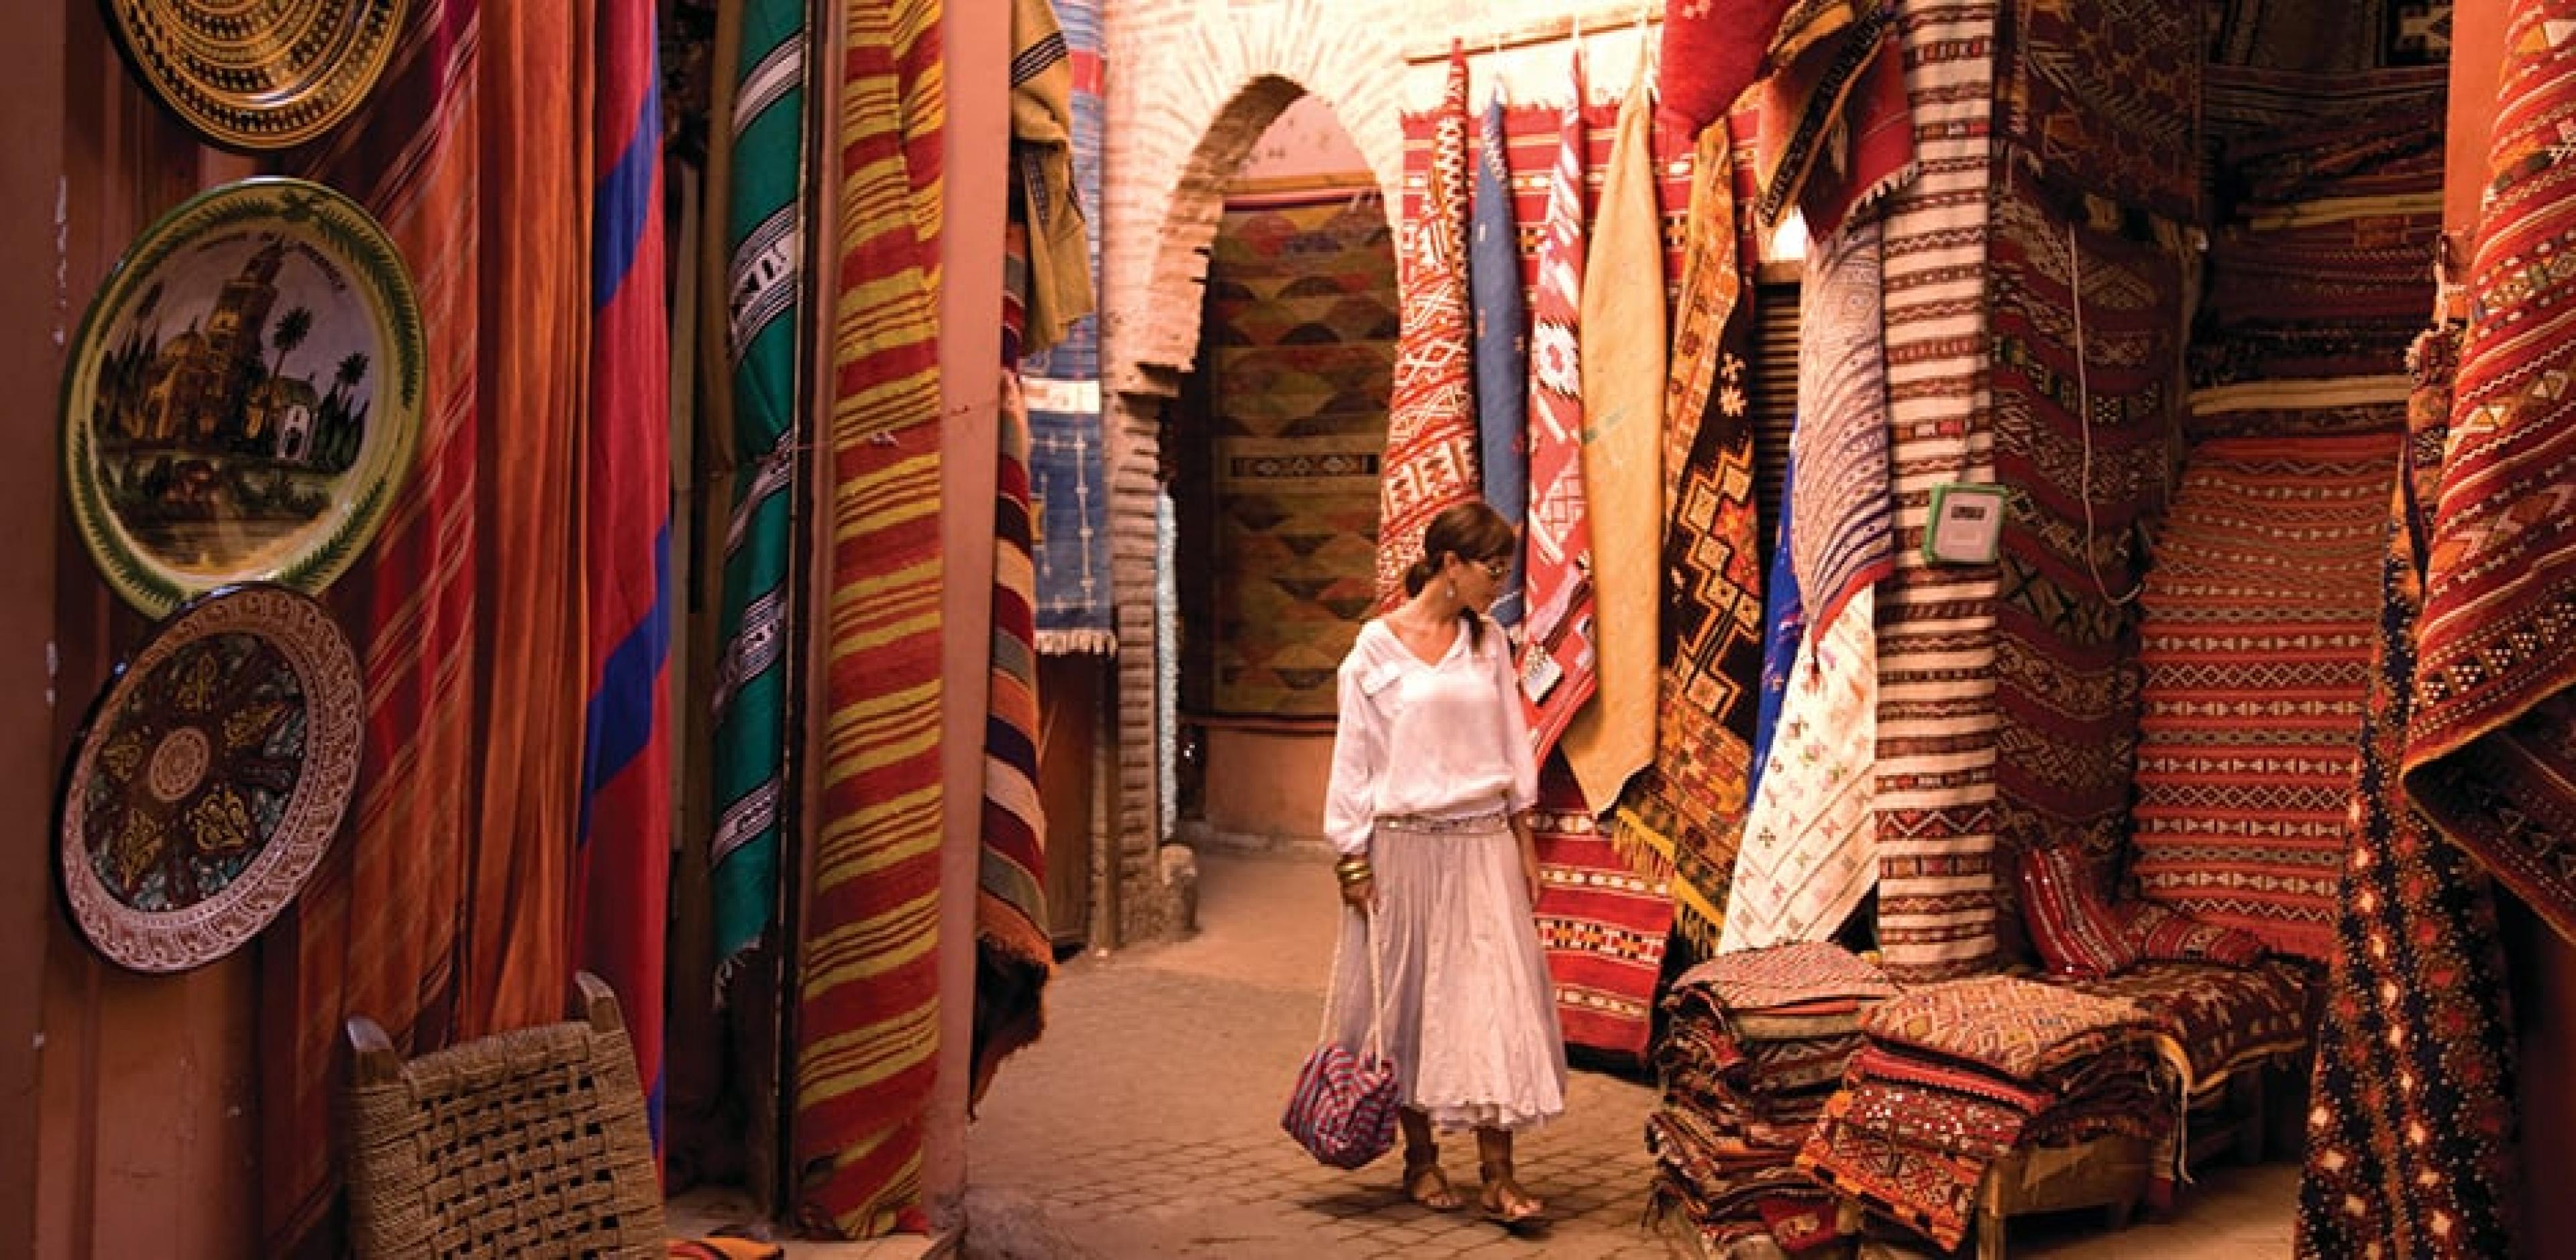 Woman shopping among hanging textiles in the Souk in Marrakech